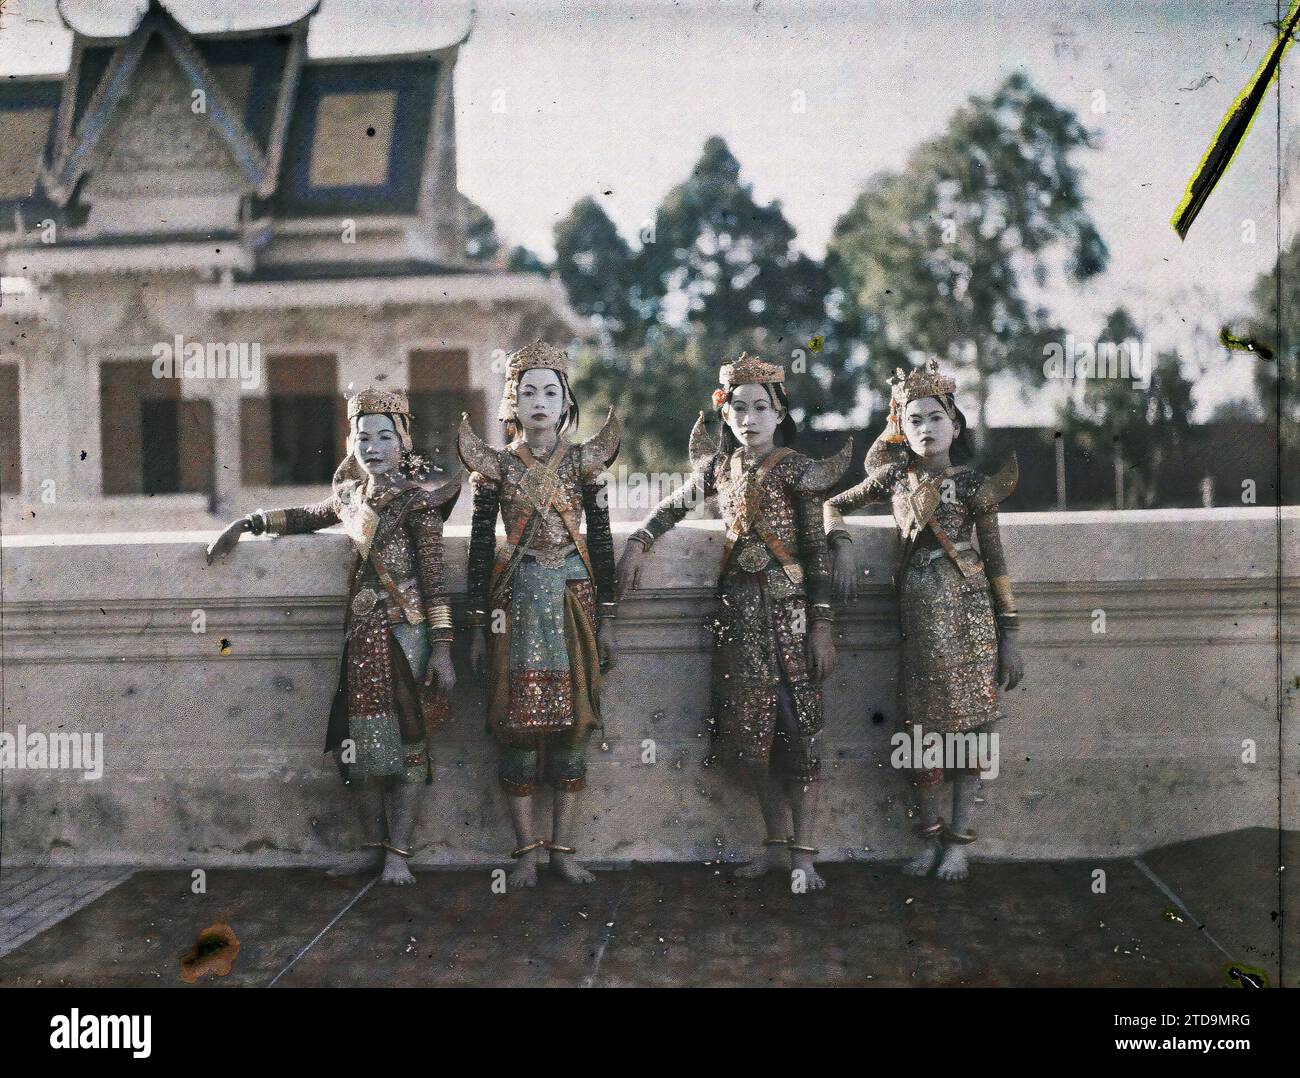 Royal Palace, Phnom Penh, Cambodia, Indochina Four dancers from the royal ballet in costume of young princes (aged under 17), Art, Clothing, Human beings, Housing, Architecture, Dance, Performance costume, Costume, King, Queen, Makeup, Carpet, wall hanging, Child, Group portrait, Jewelry, Palace, Castle, Indochina, Group of actors, Phnom Penh, 01/01/1921 - 31/12/1921, Busy, Léon, Léon Busy photographer en Indochine, Autochrome, photo, Glass, Autochrome, photo, Positive, Horizontal, Size 9 x 12 cm Stock Photo